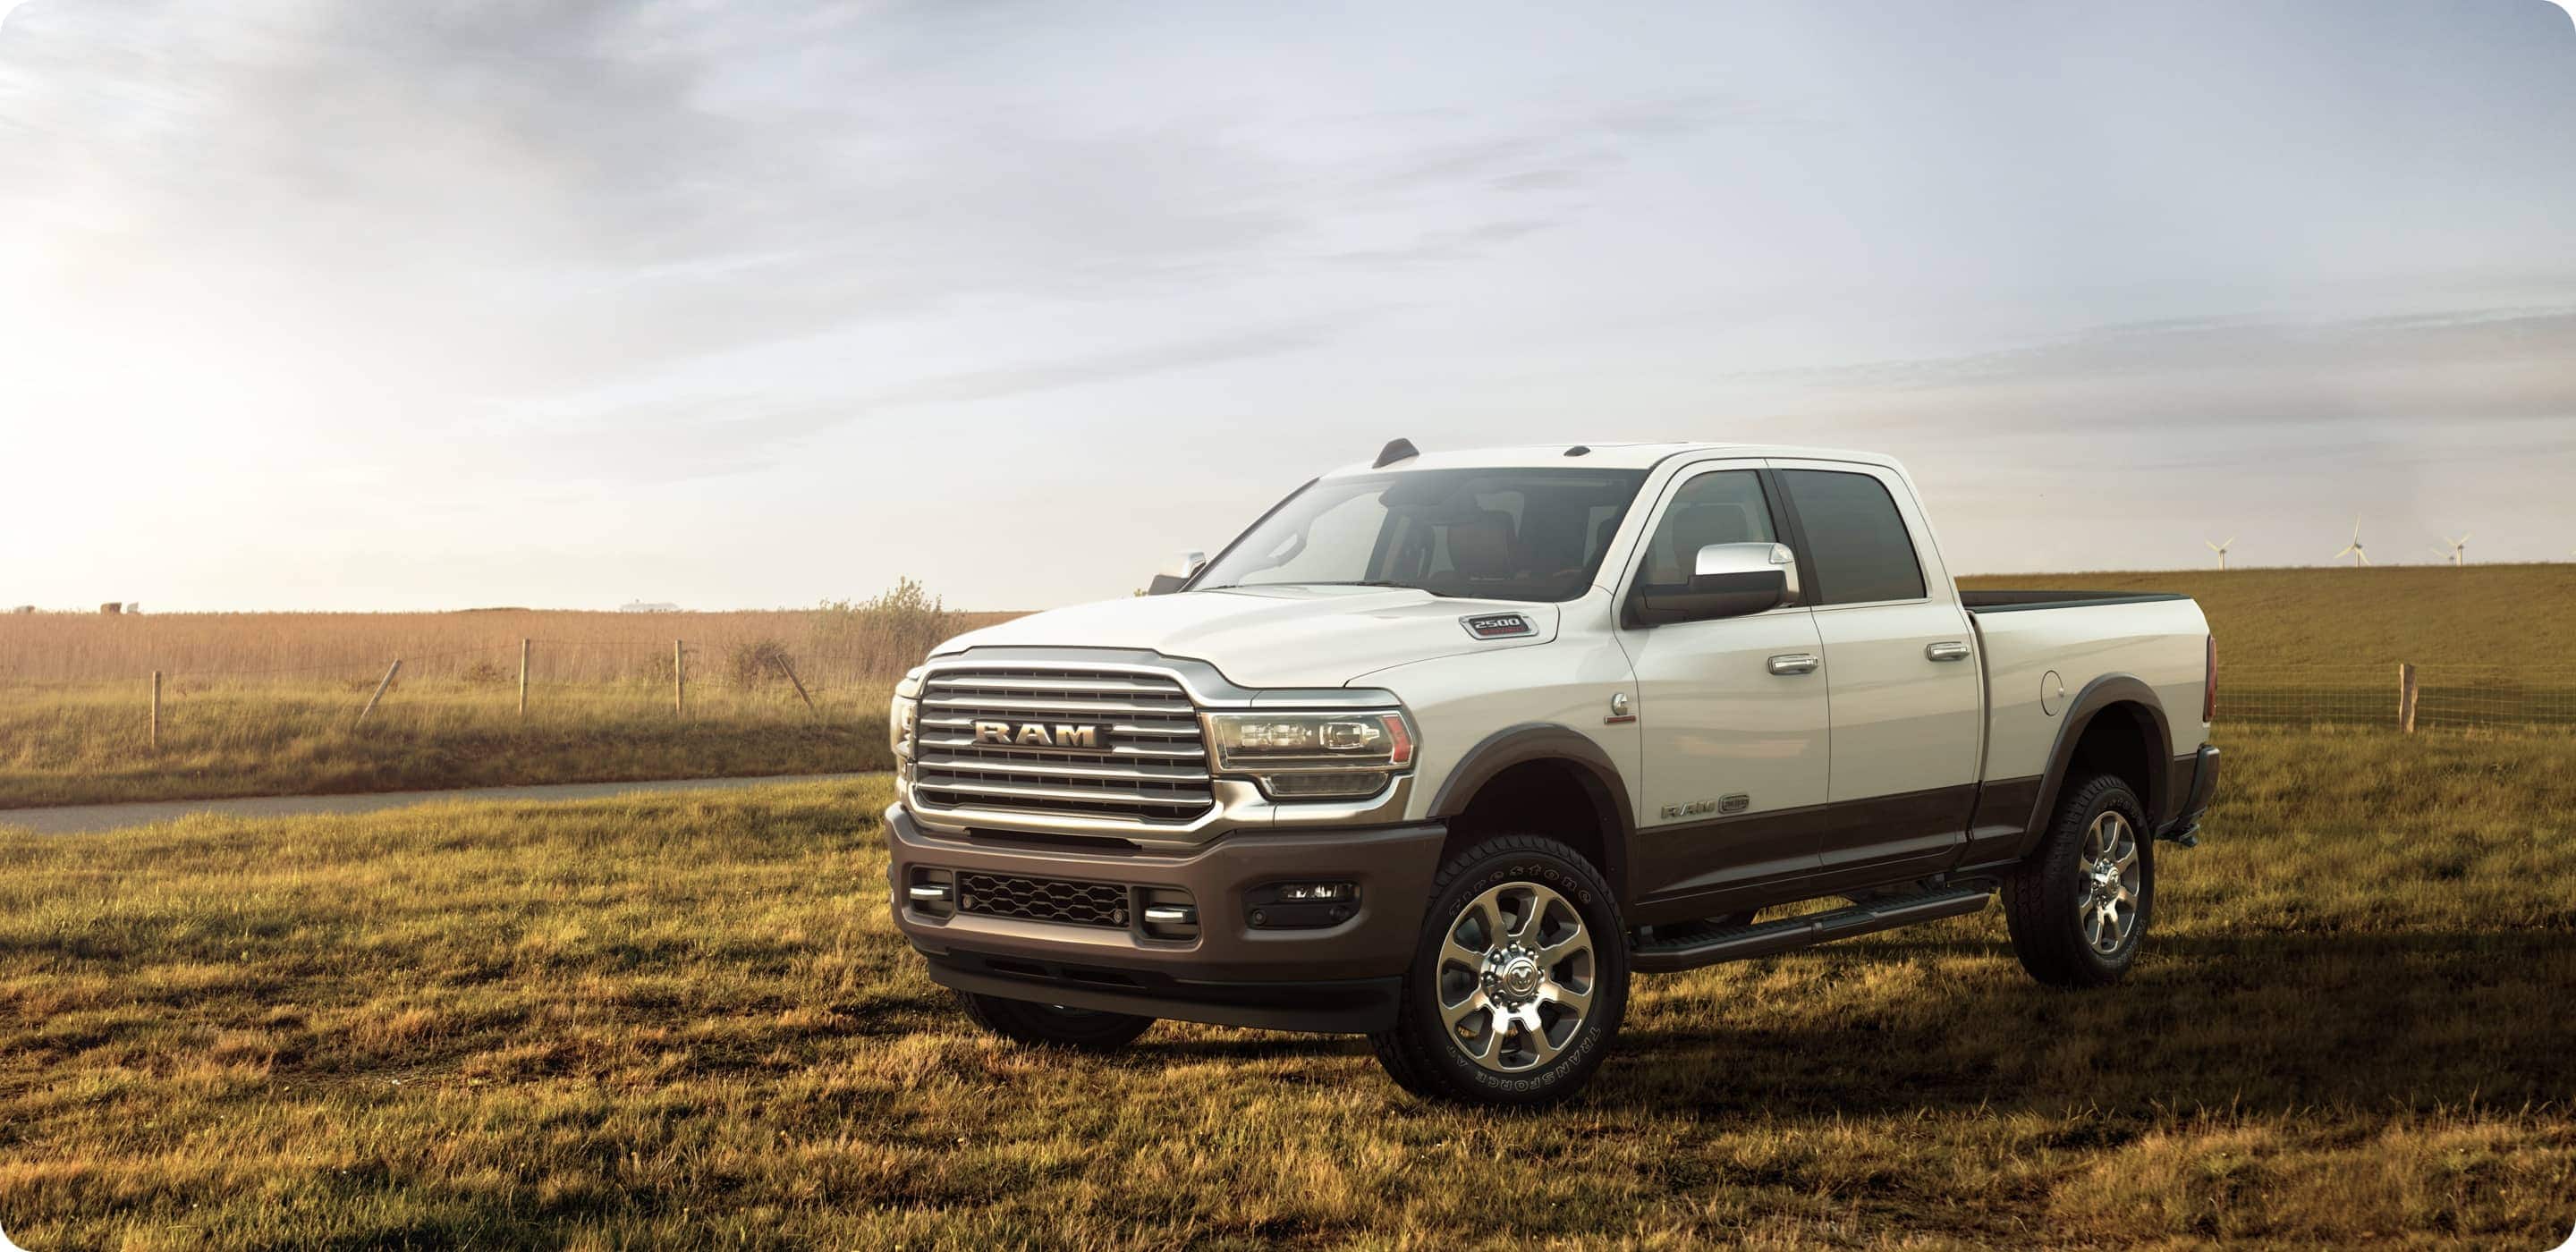 Display A white 2021 Ram 2500 Limited Longhorn parked in an open field with windmills in the distance.